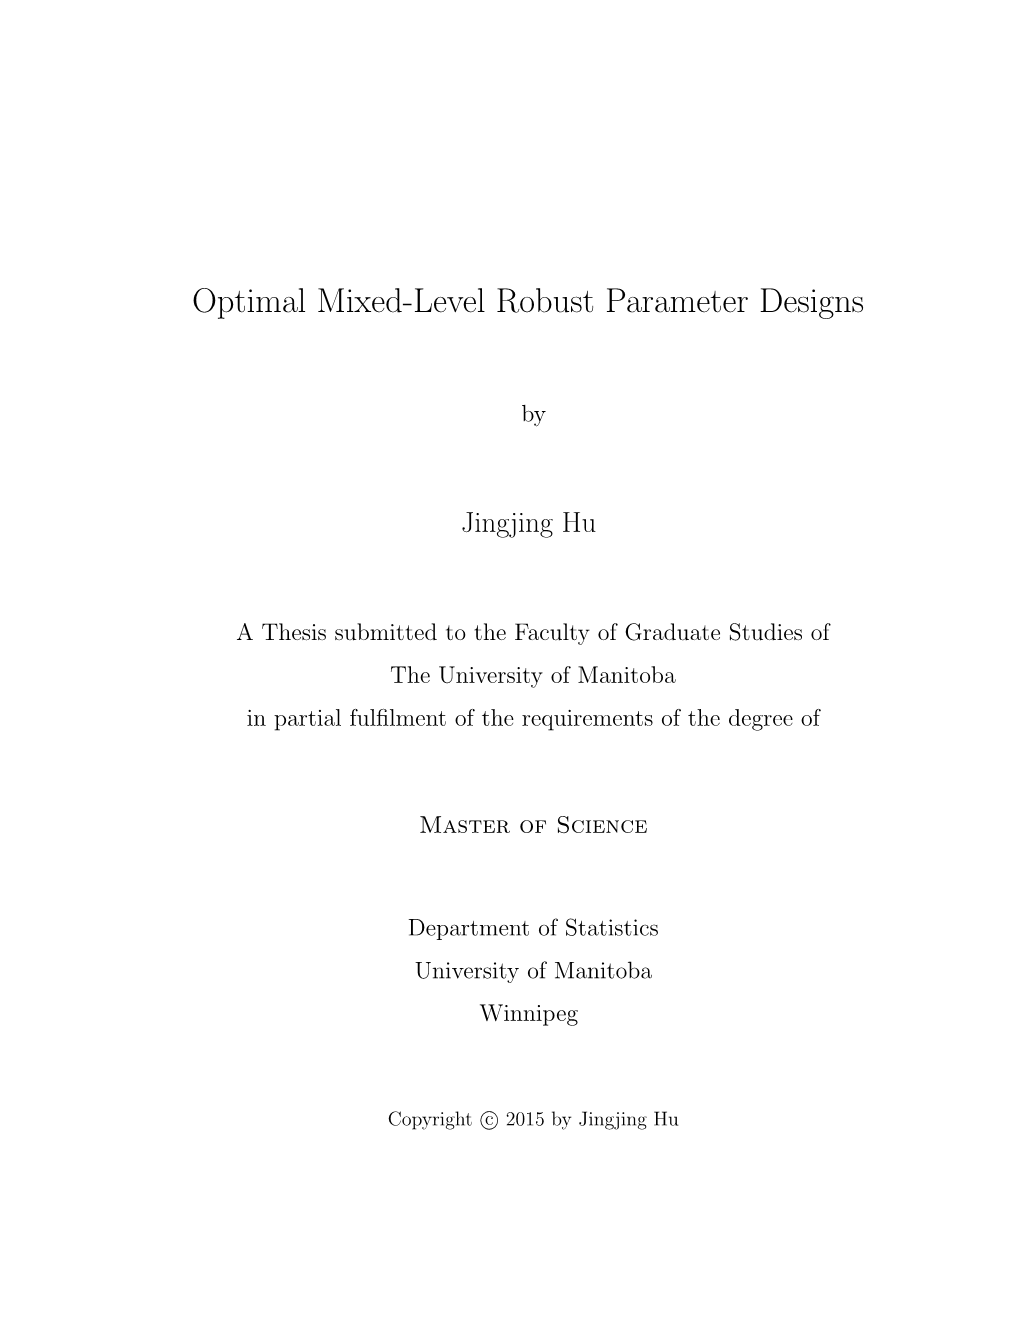 Optimal Mixed-Level Robust Parameter Designs